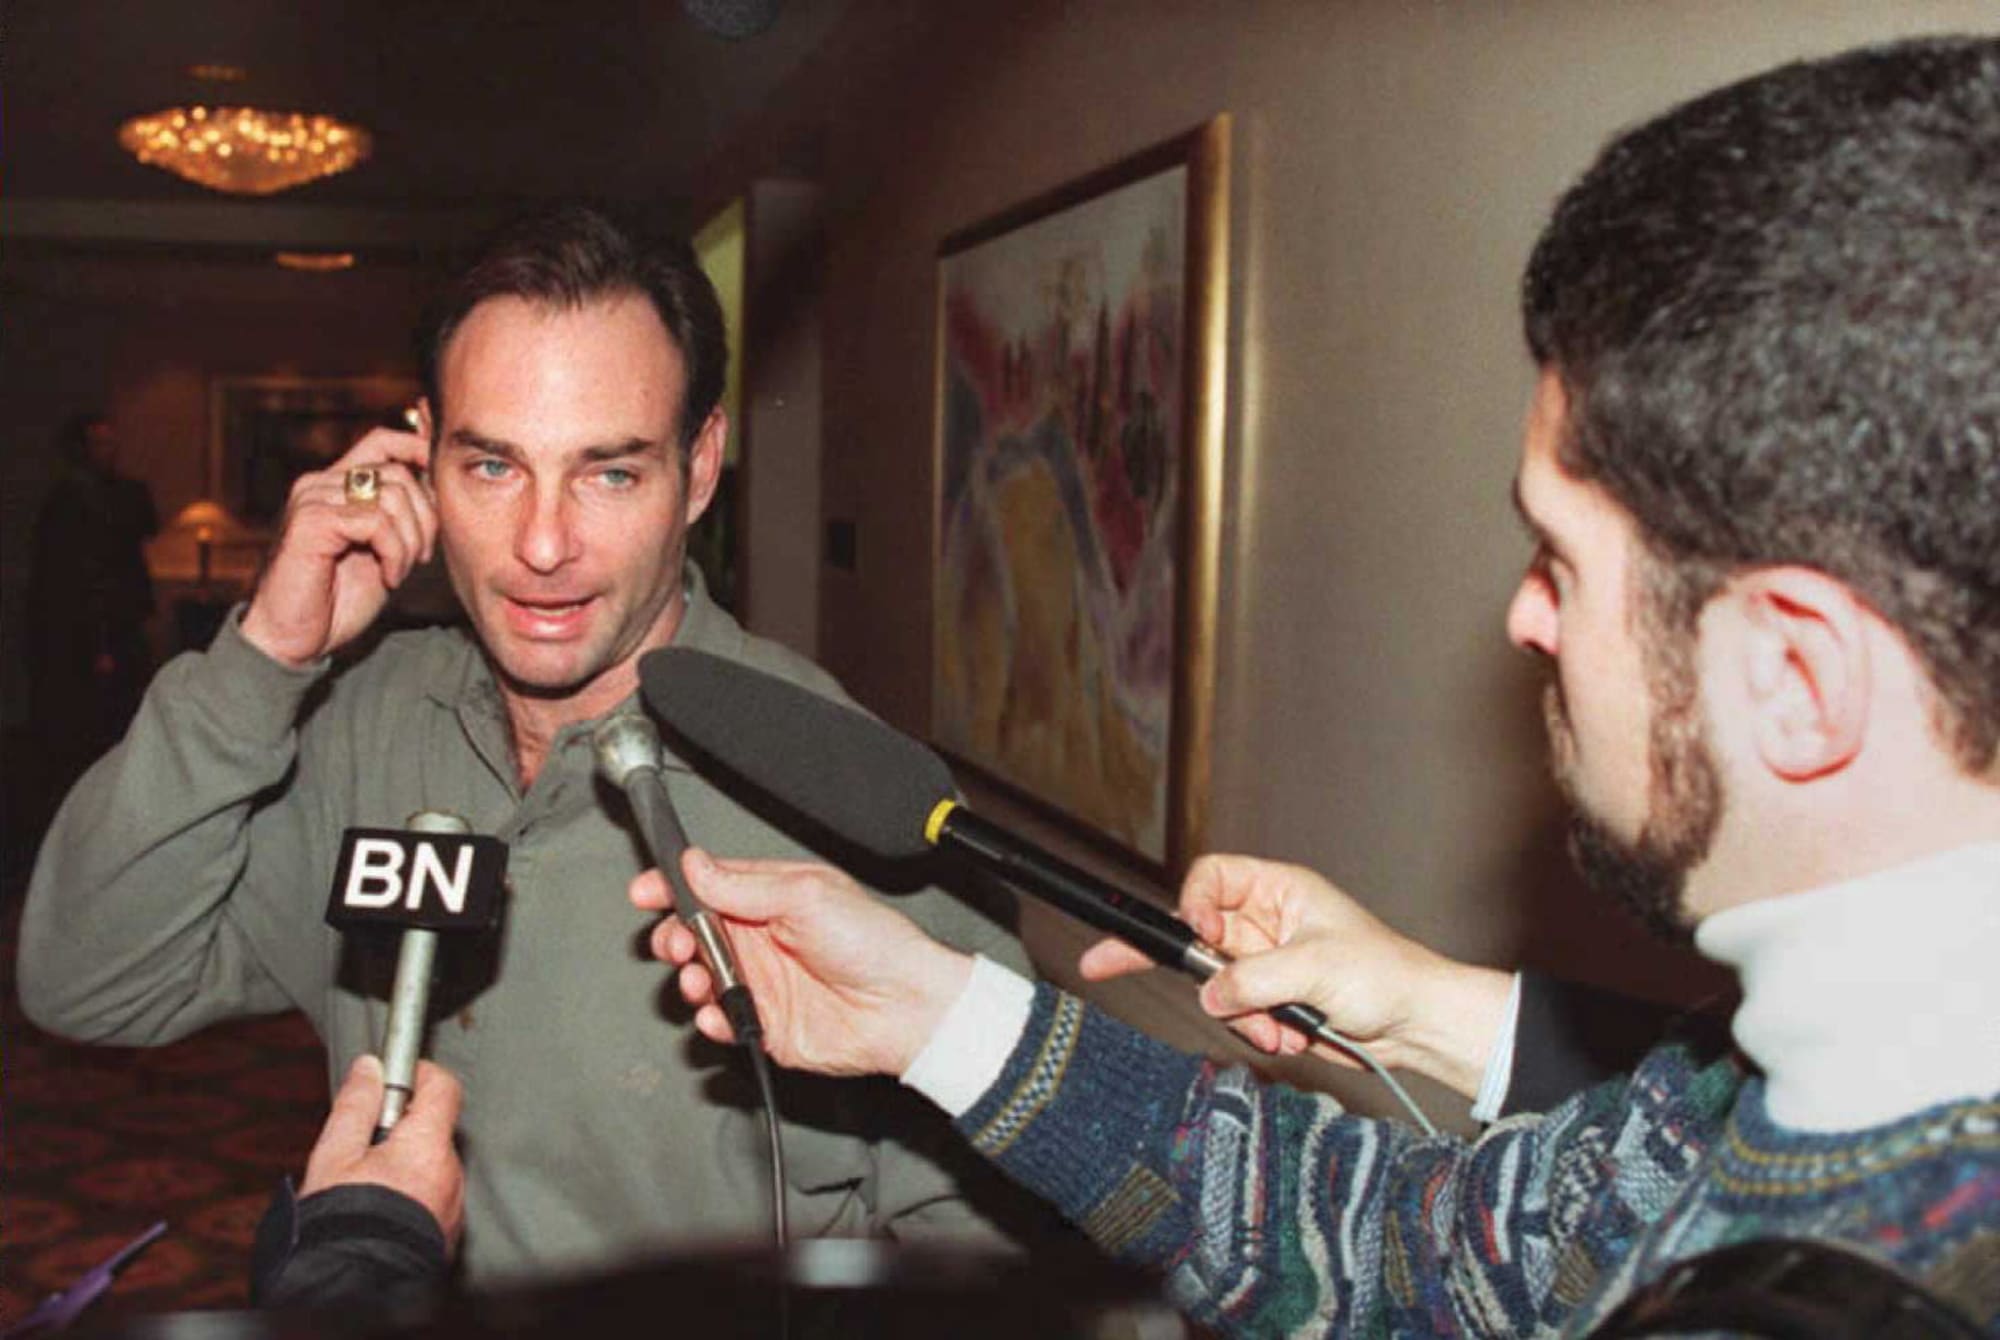 Paul Molitor with the 1993 World Series MVP trophy